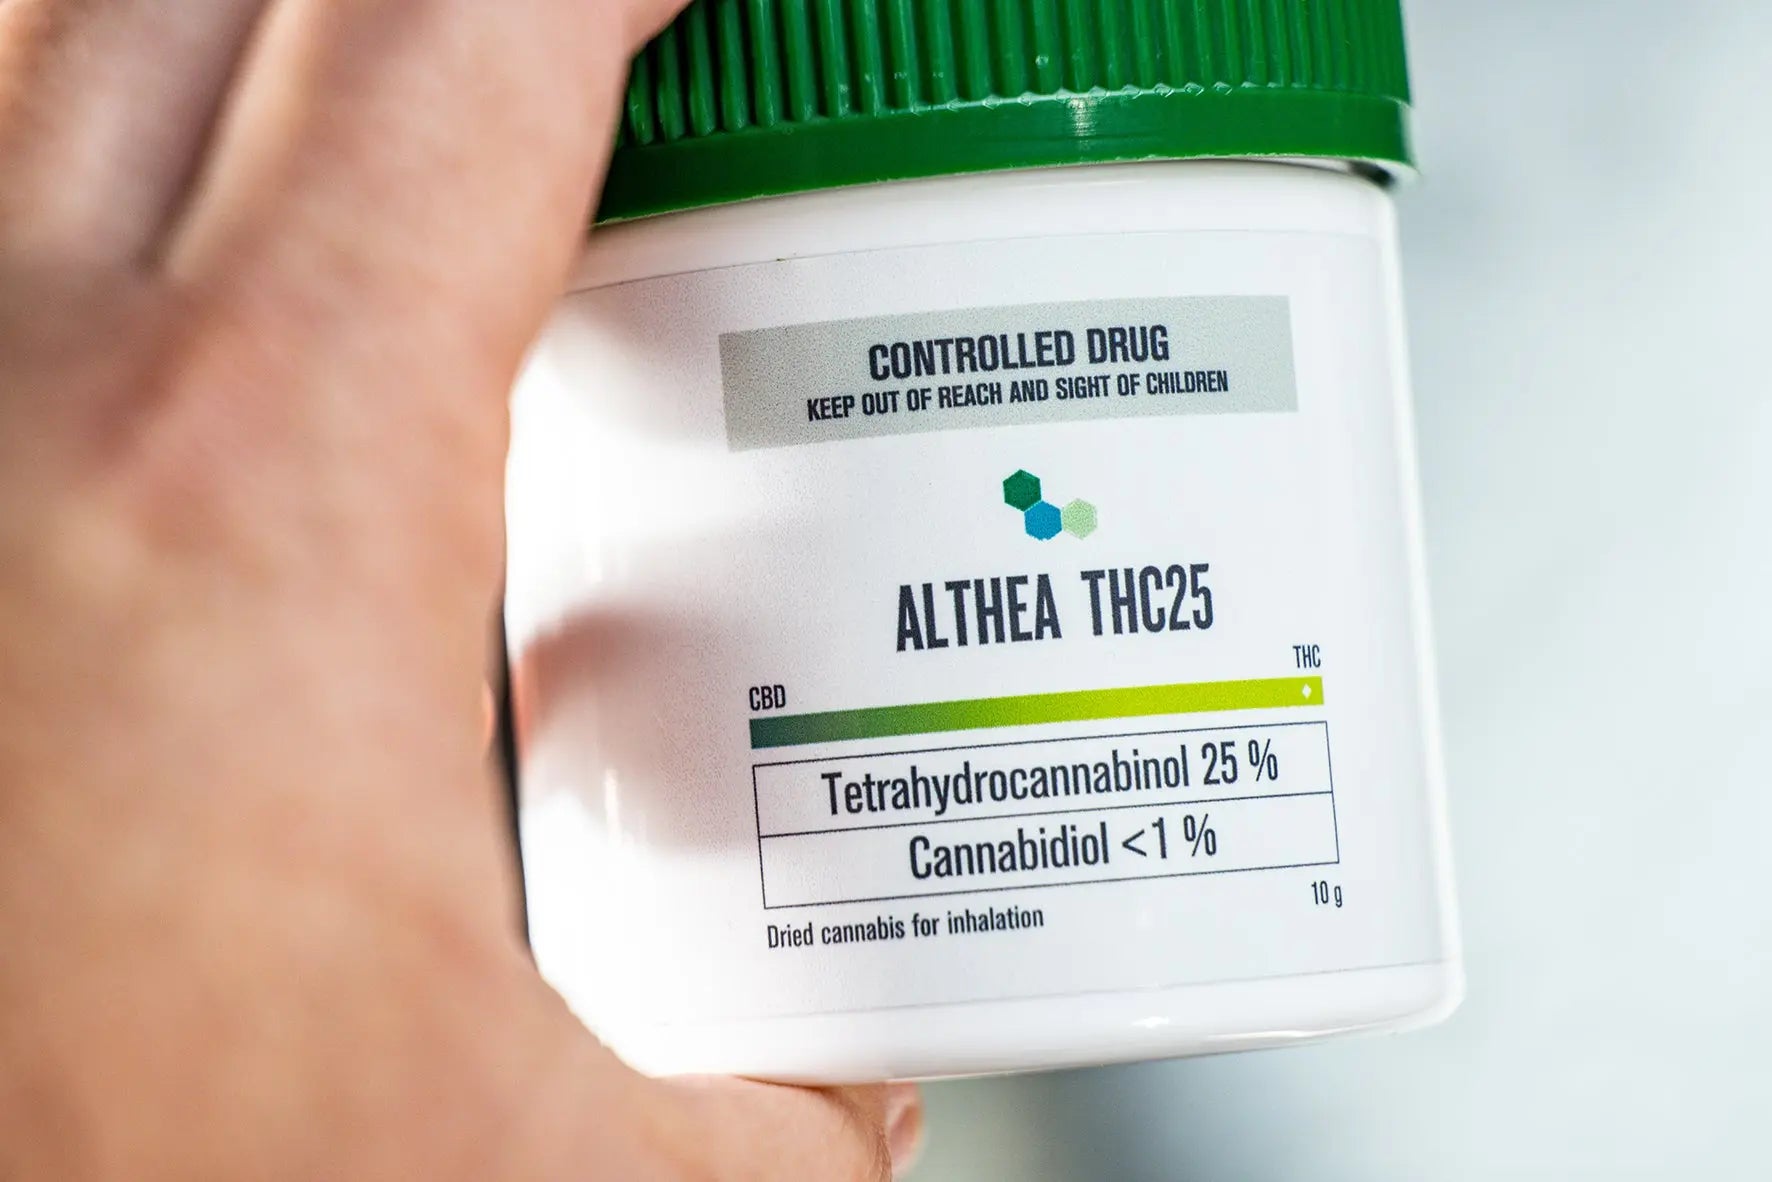 Althea T25 Powdered Donuts medical cannabis review UK 